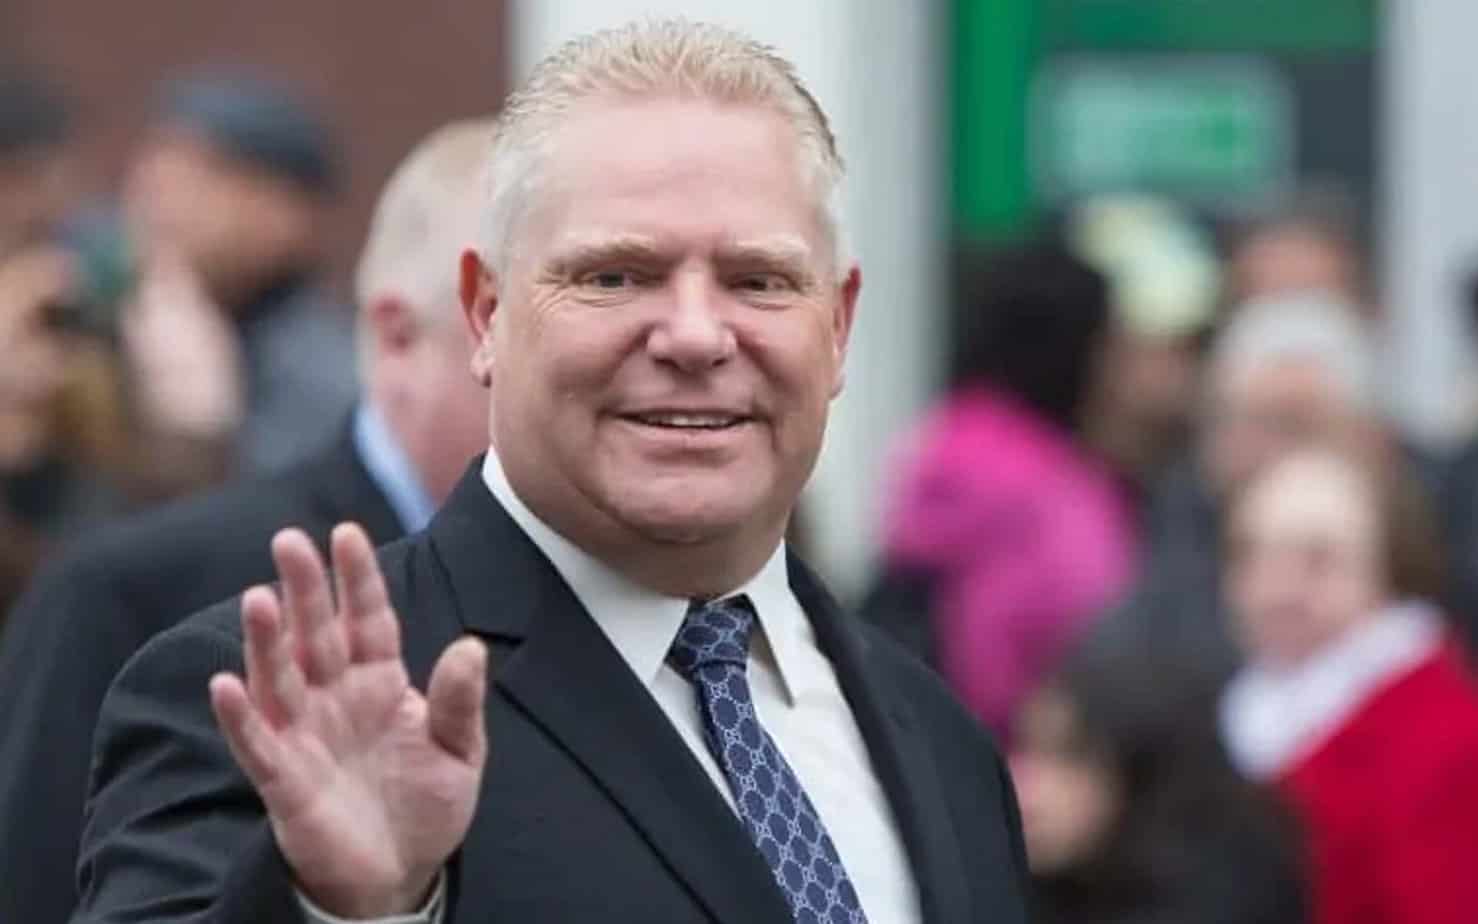 Ontario Plans to Hold Off Economy Reopening - Doug Ford shares plans